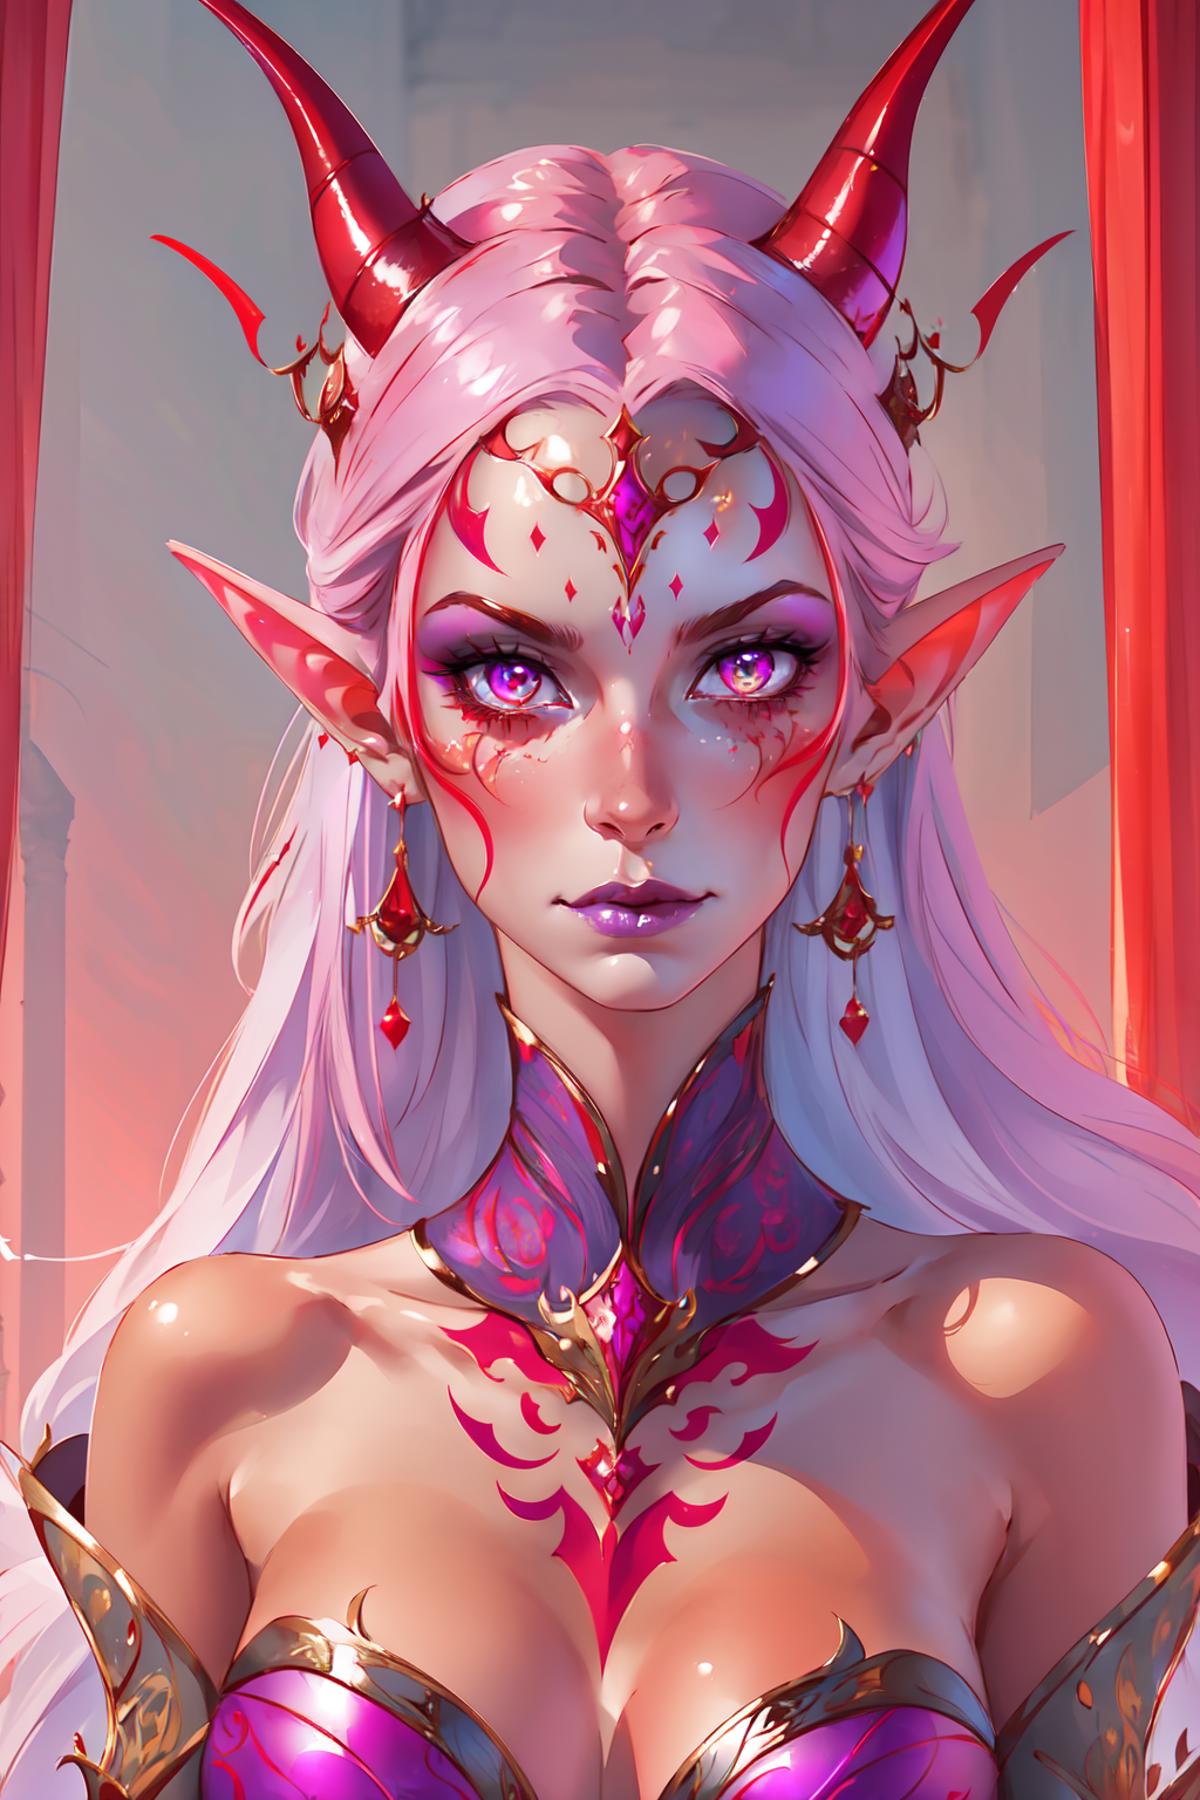 Tiefling Concept LyCO image by LittleLizzie